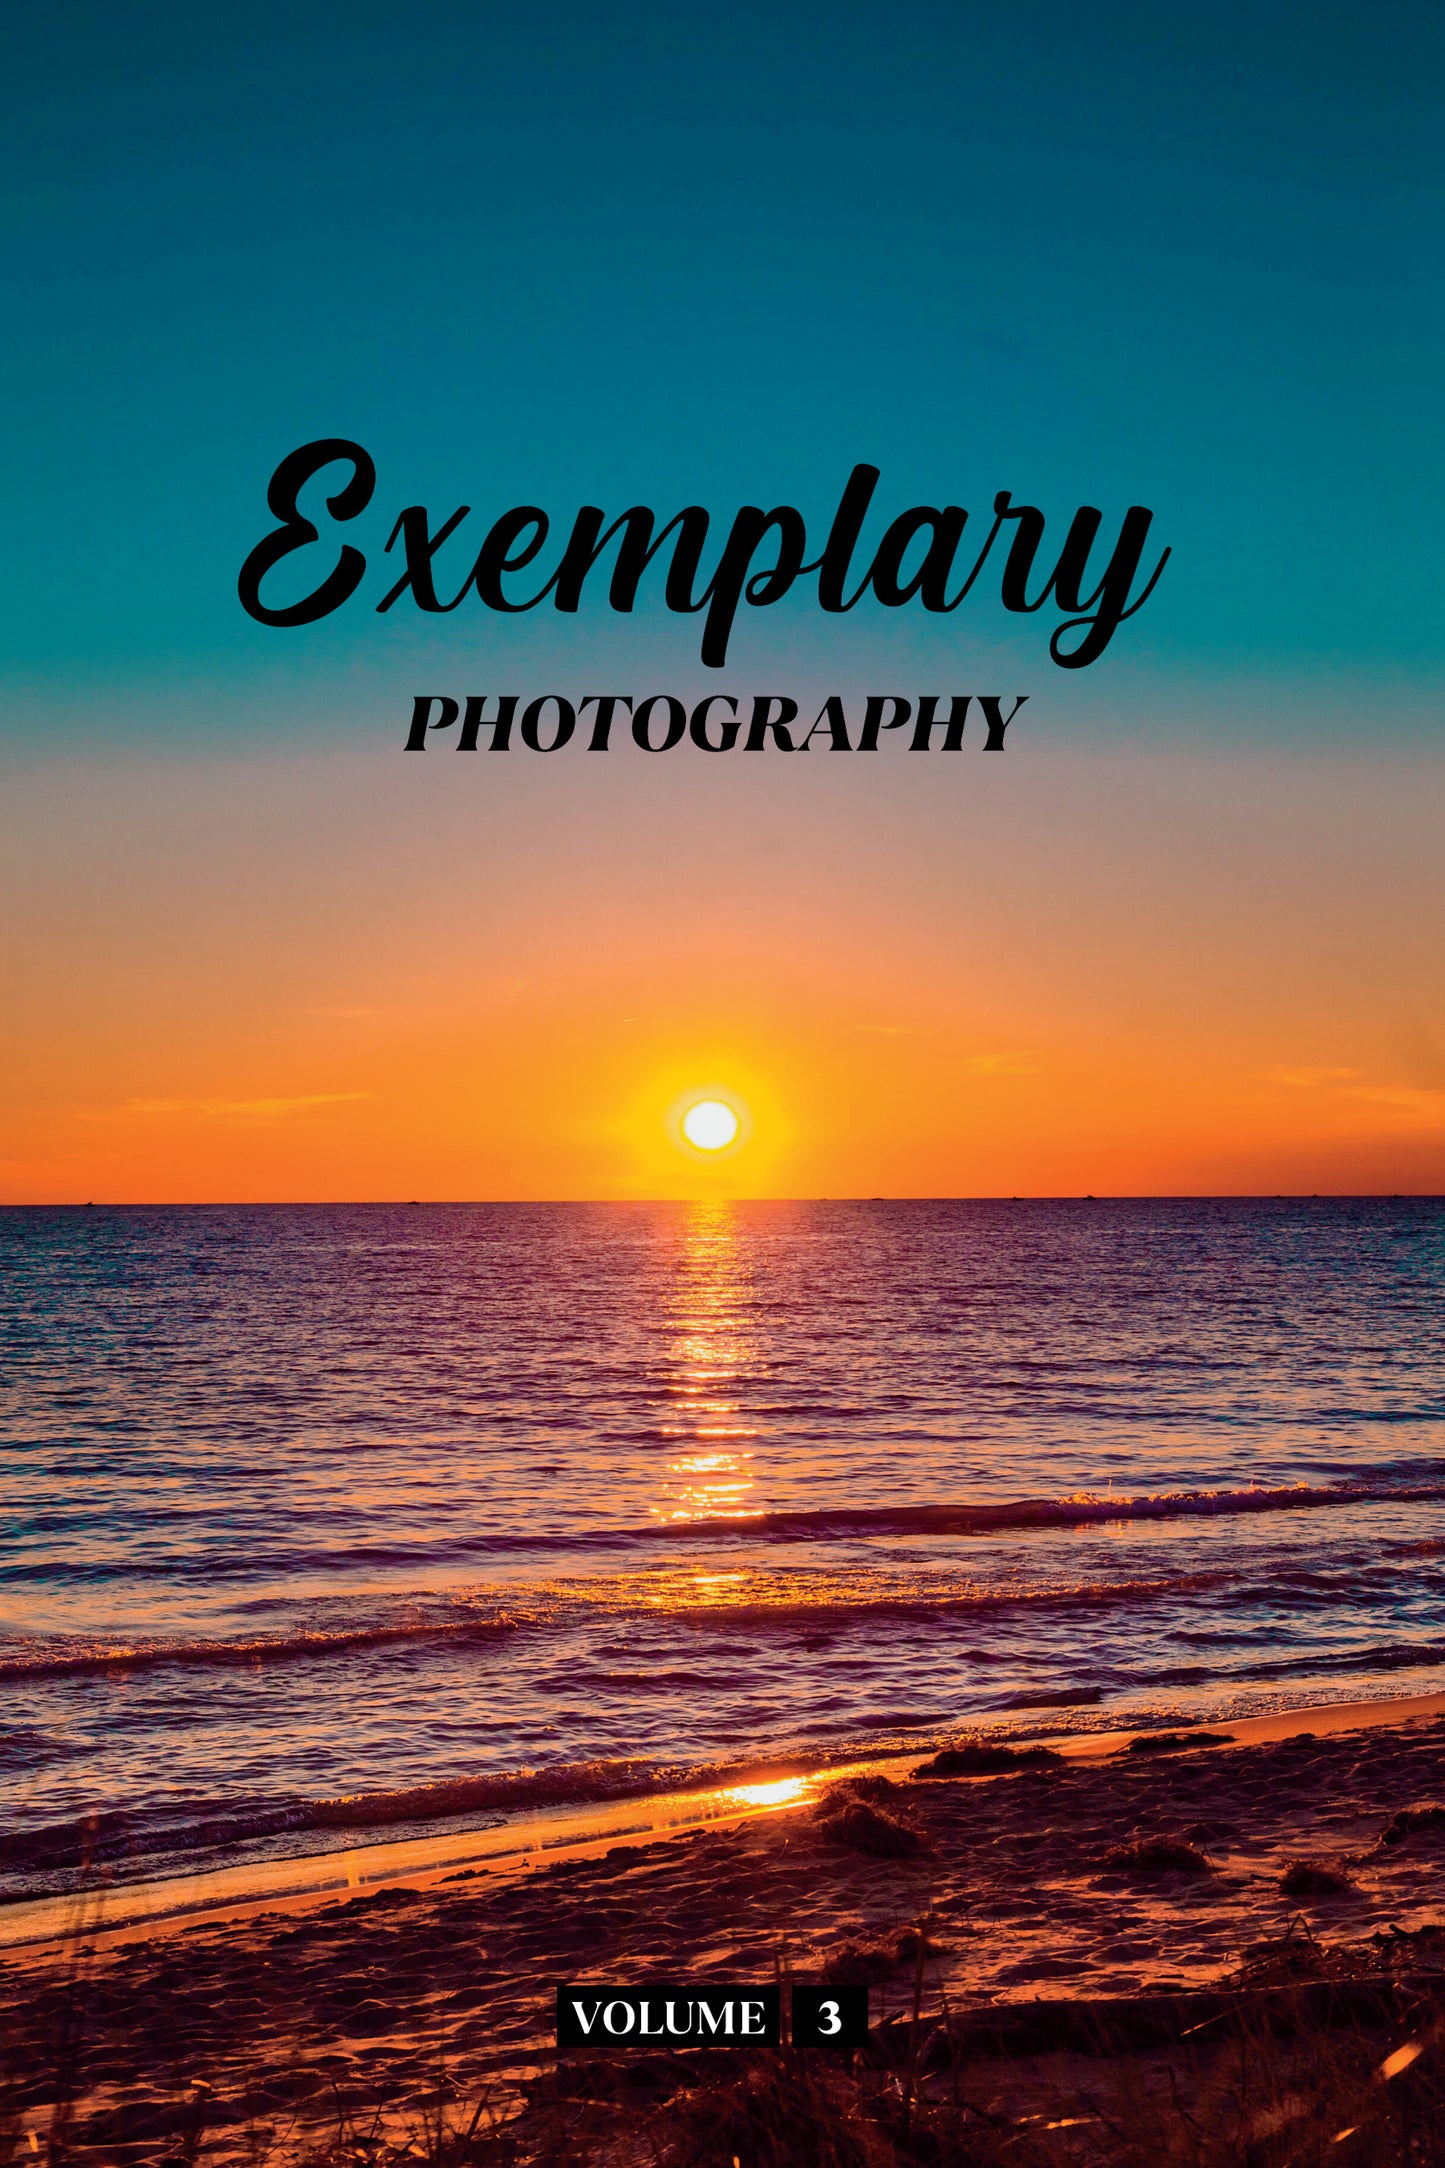 Exemplary Photography Volume 3 (Physical Book)